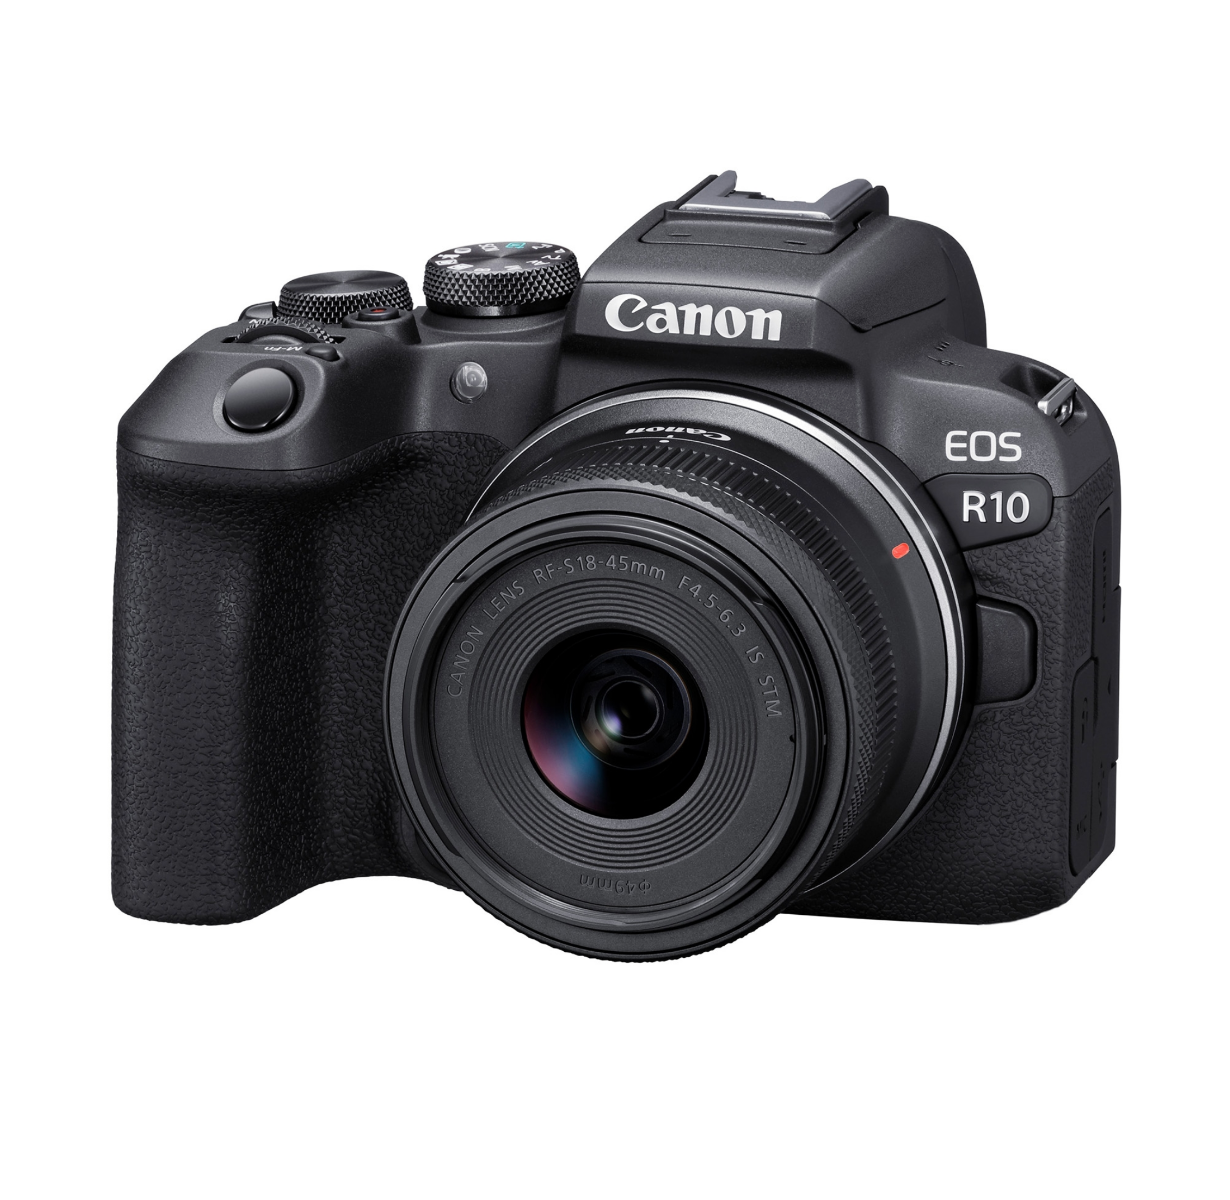 Canon EOS R10 Mirrorless Camera + RF-S 18-45mm lens Kit - Product photo 3 - Front side view of the camera with the lens attached